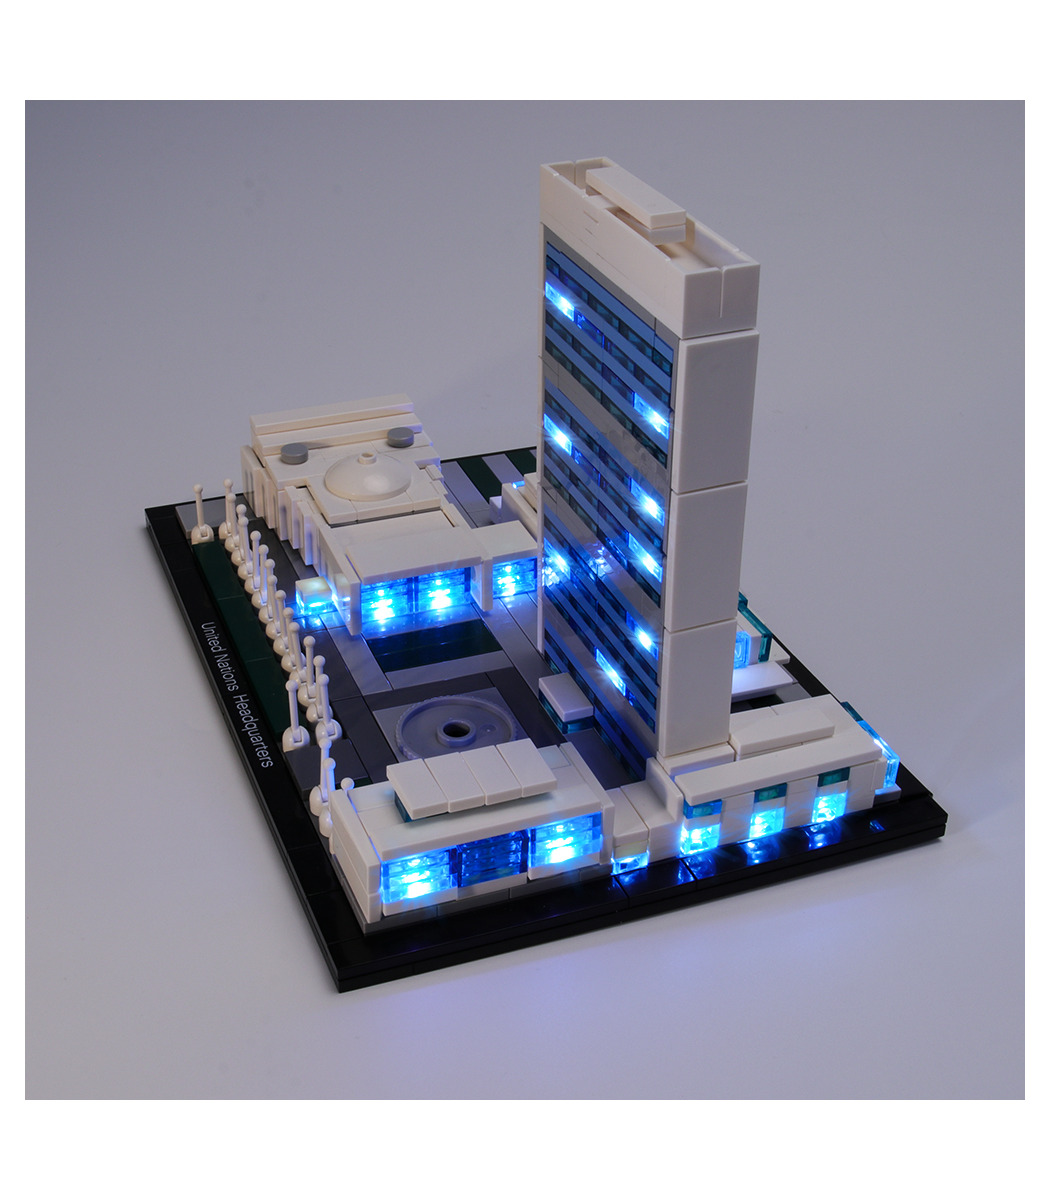 Details about   LED Light Kit For Architecture United Nations Headquarters LEGOs 21018 Light Set